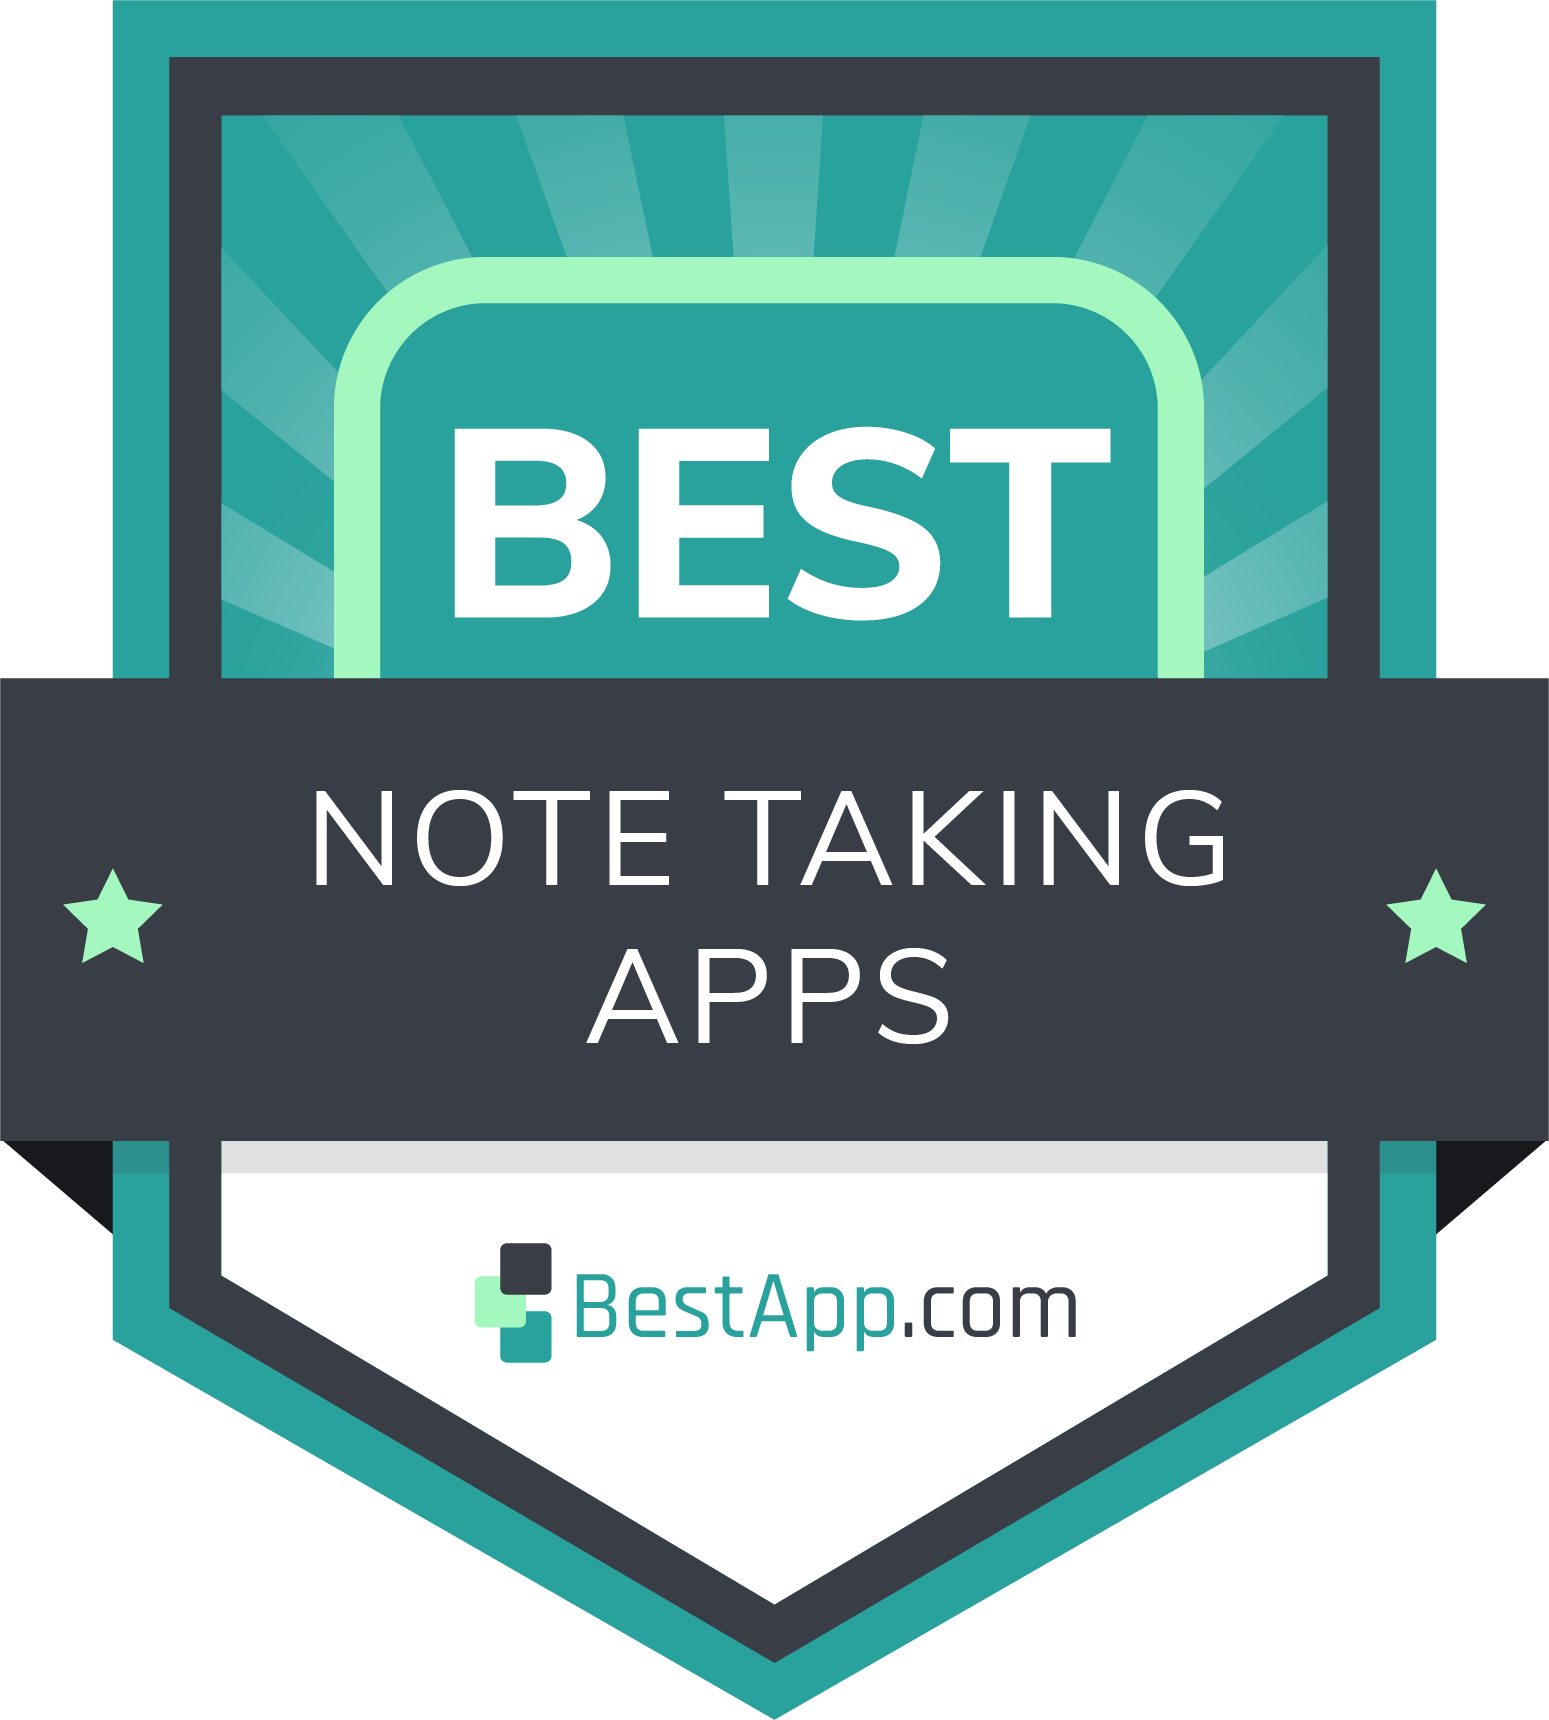 Best Note-Taking Apps Badge